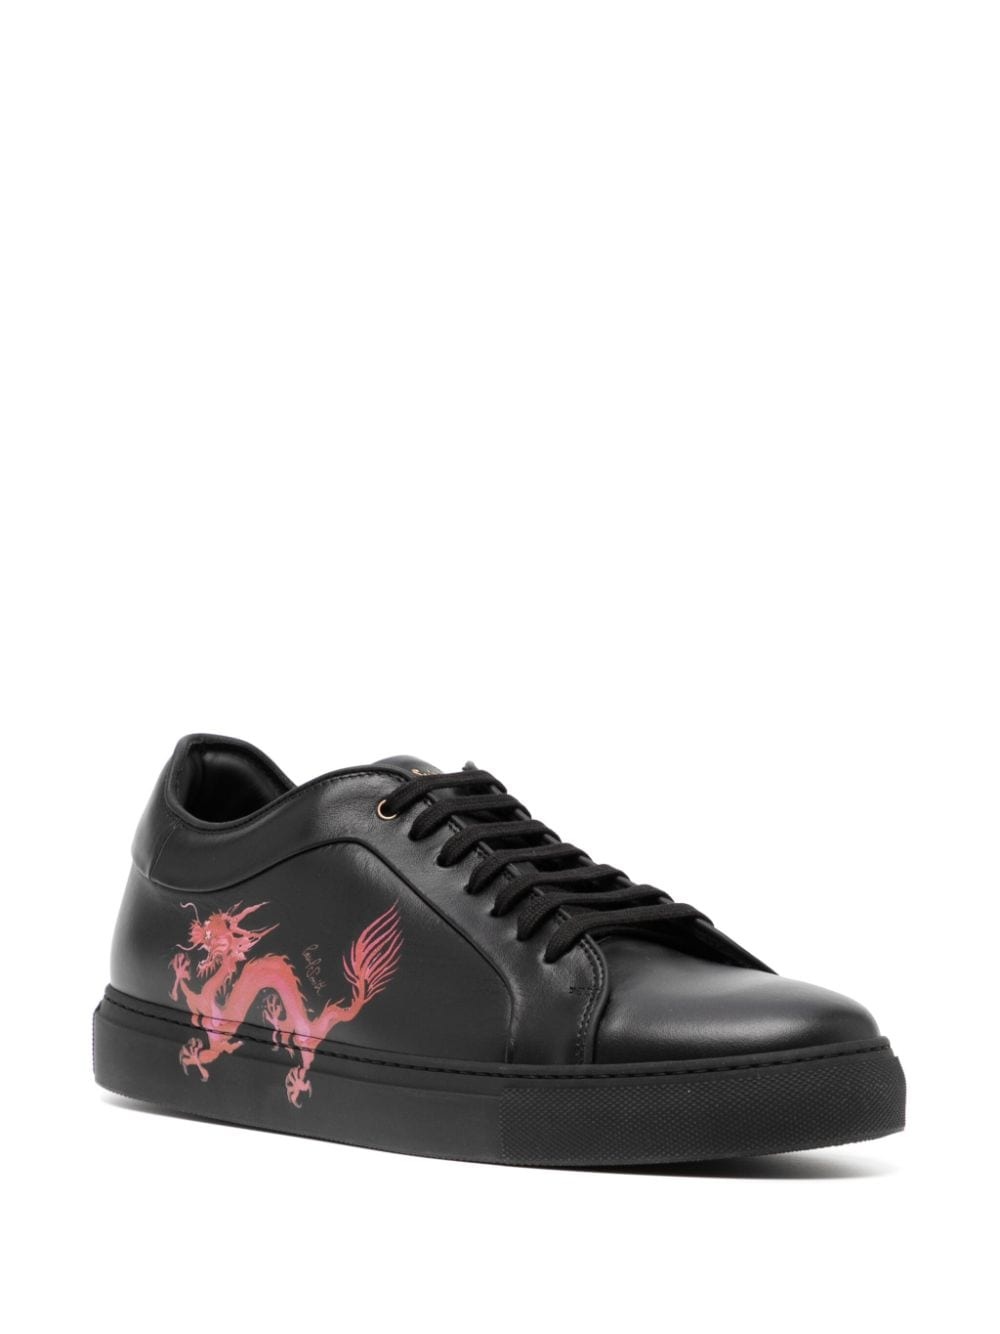 dragon-print leather sneakers - 2